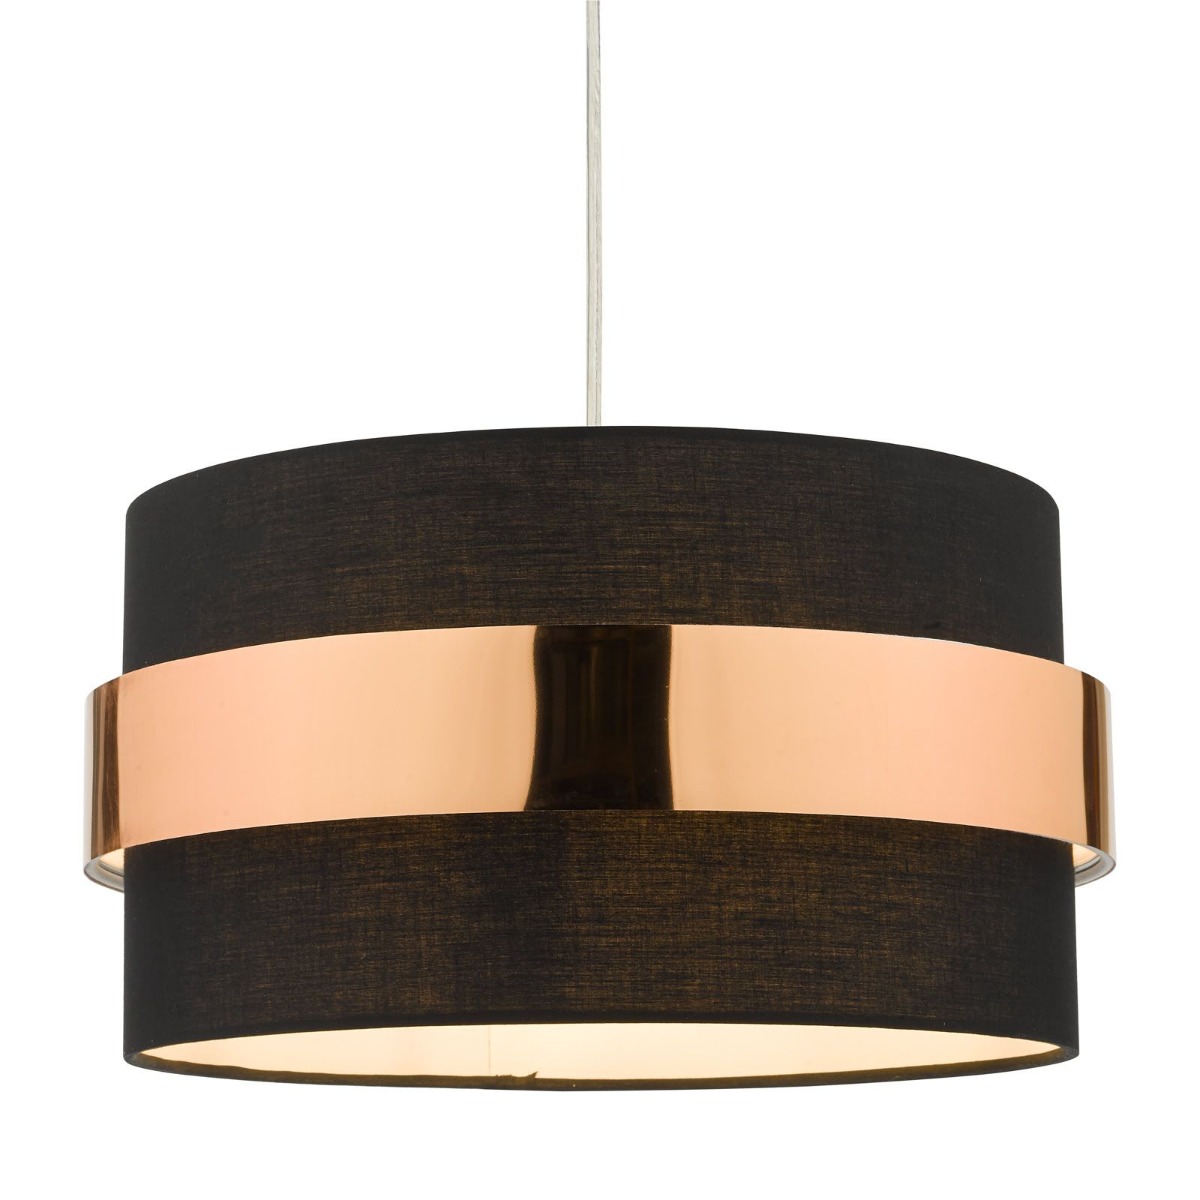 Image of Dar Wisebuys Oki Easy Fit Ceiling Pendant Shade In Black And Copper